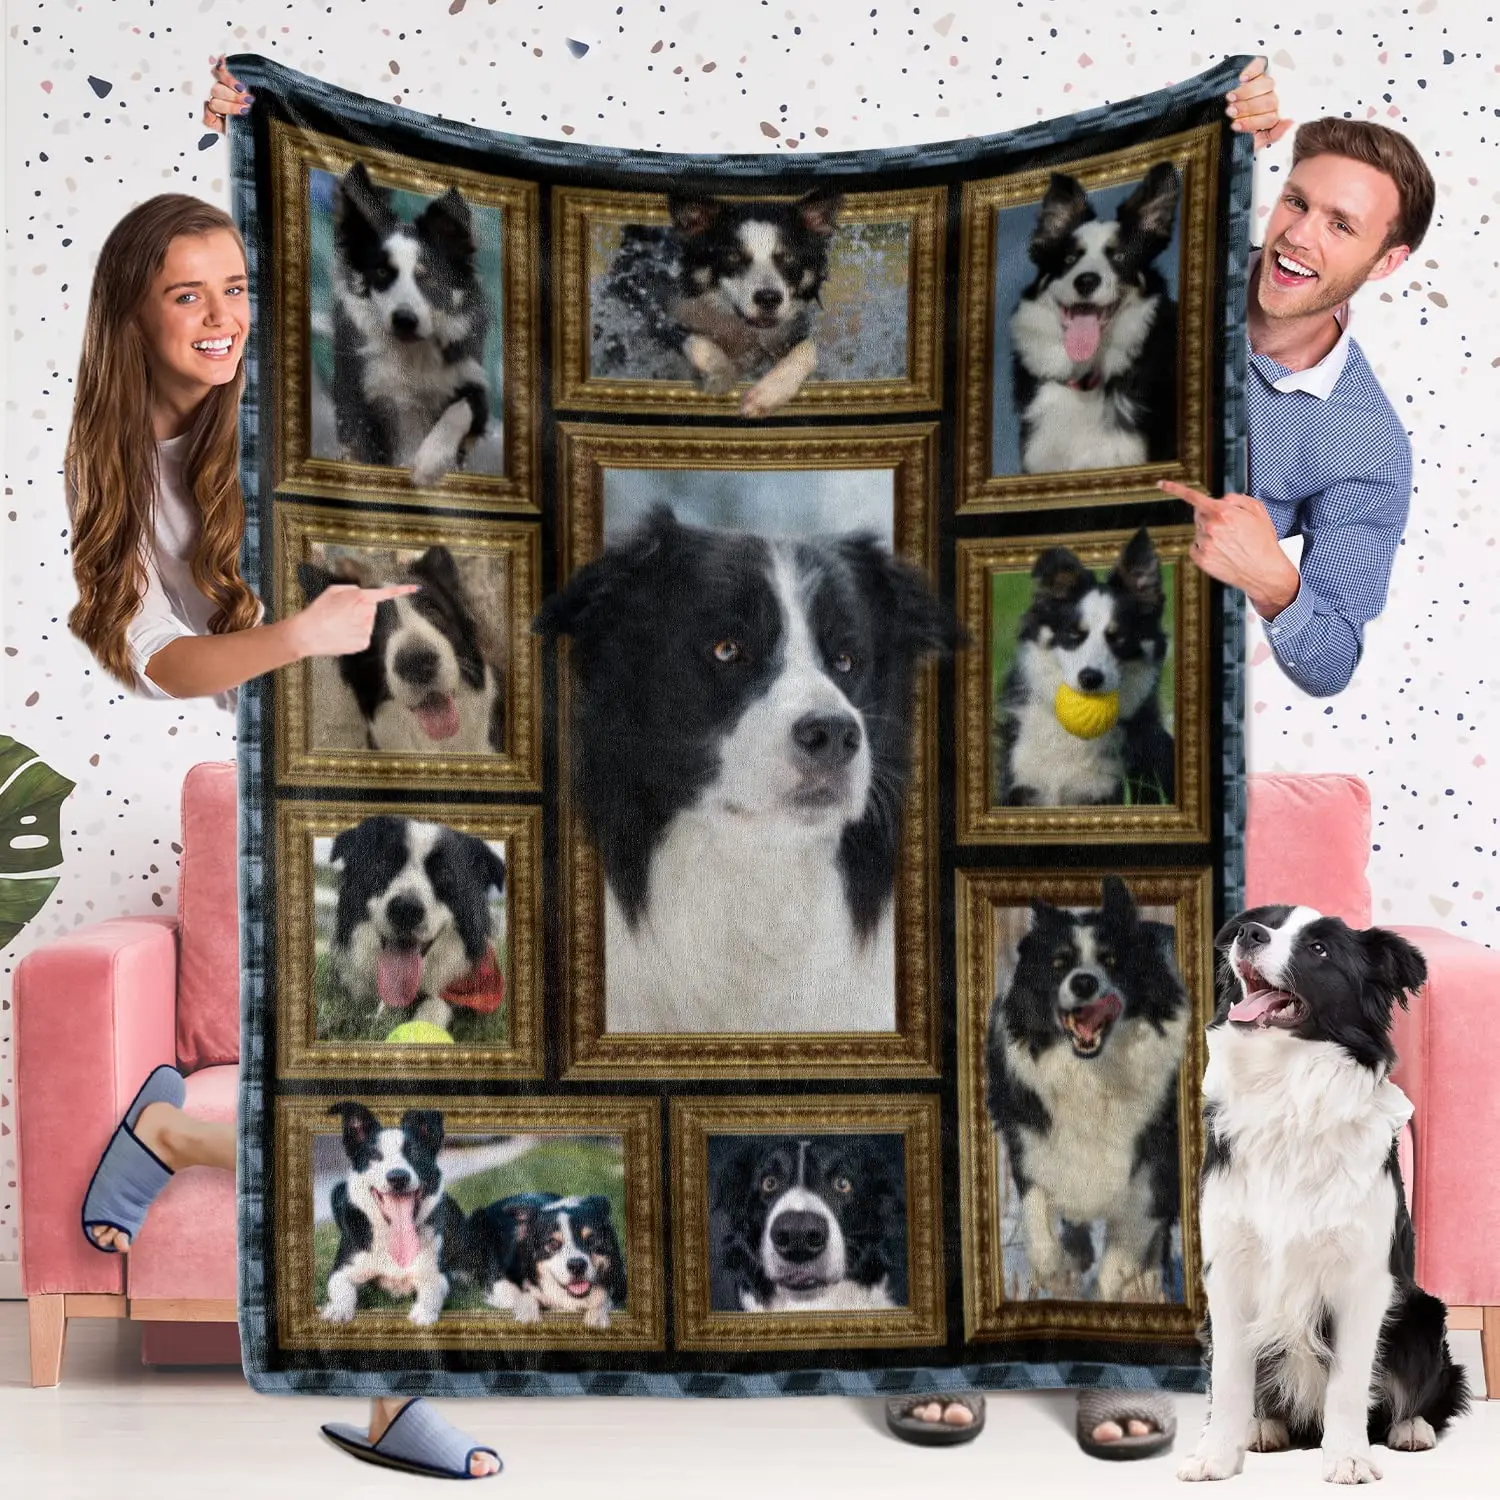 

Border Collie Running In The Water Fleece Throw Blanket, Fuzzy Warm Throw Blanket for Bed Sofa Couch House Warm Decor Gifts Idea